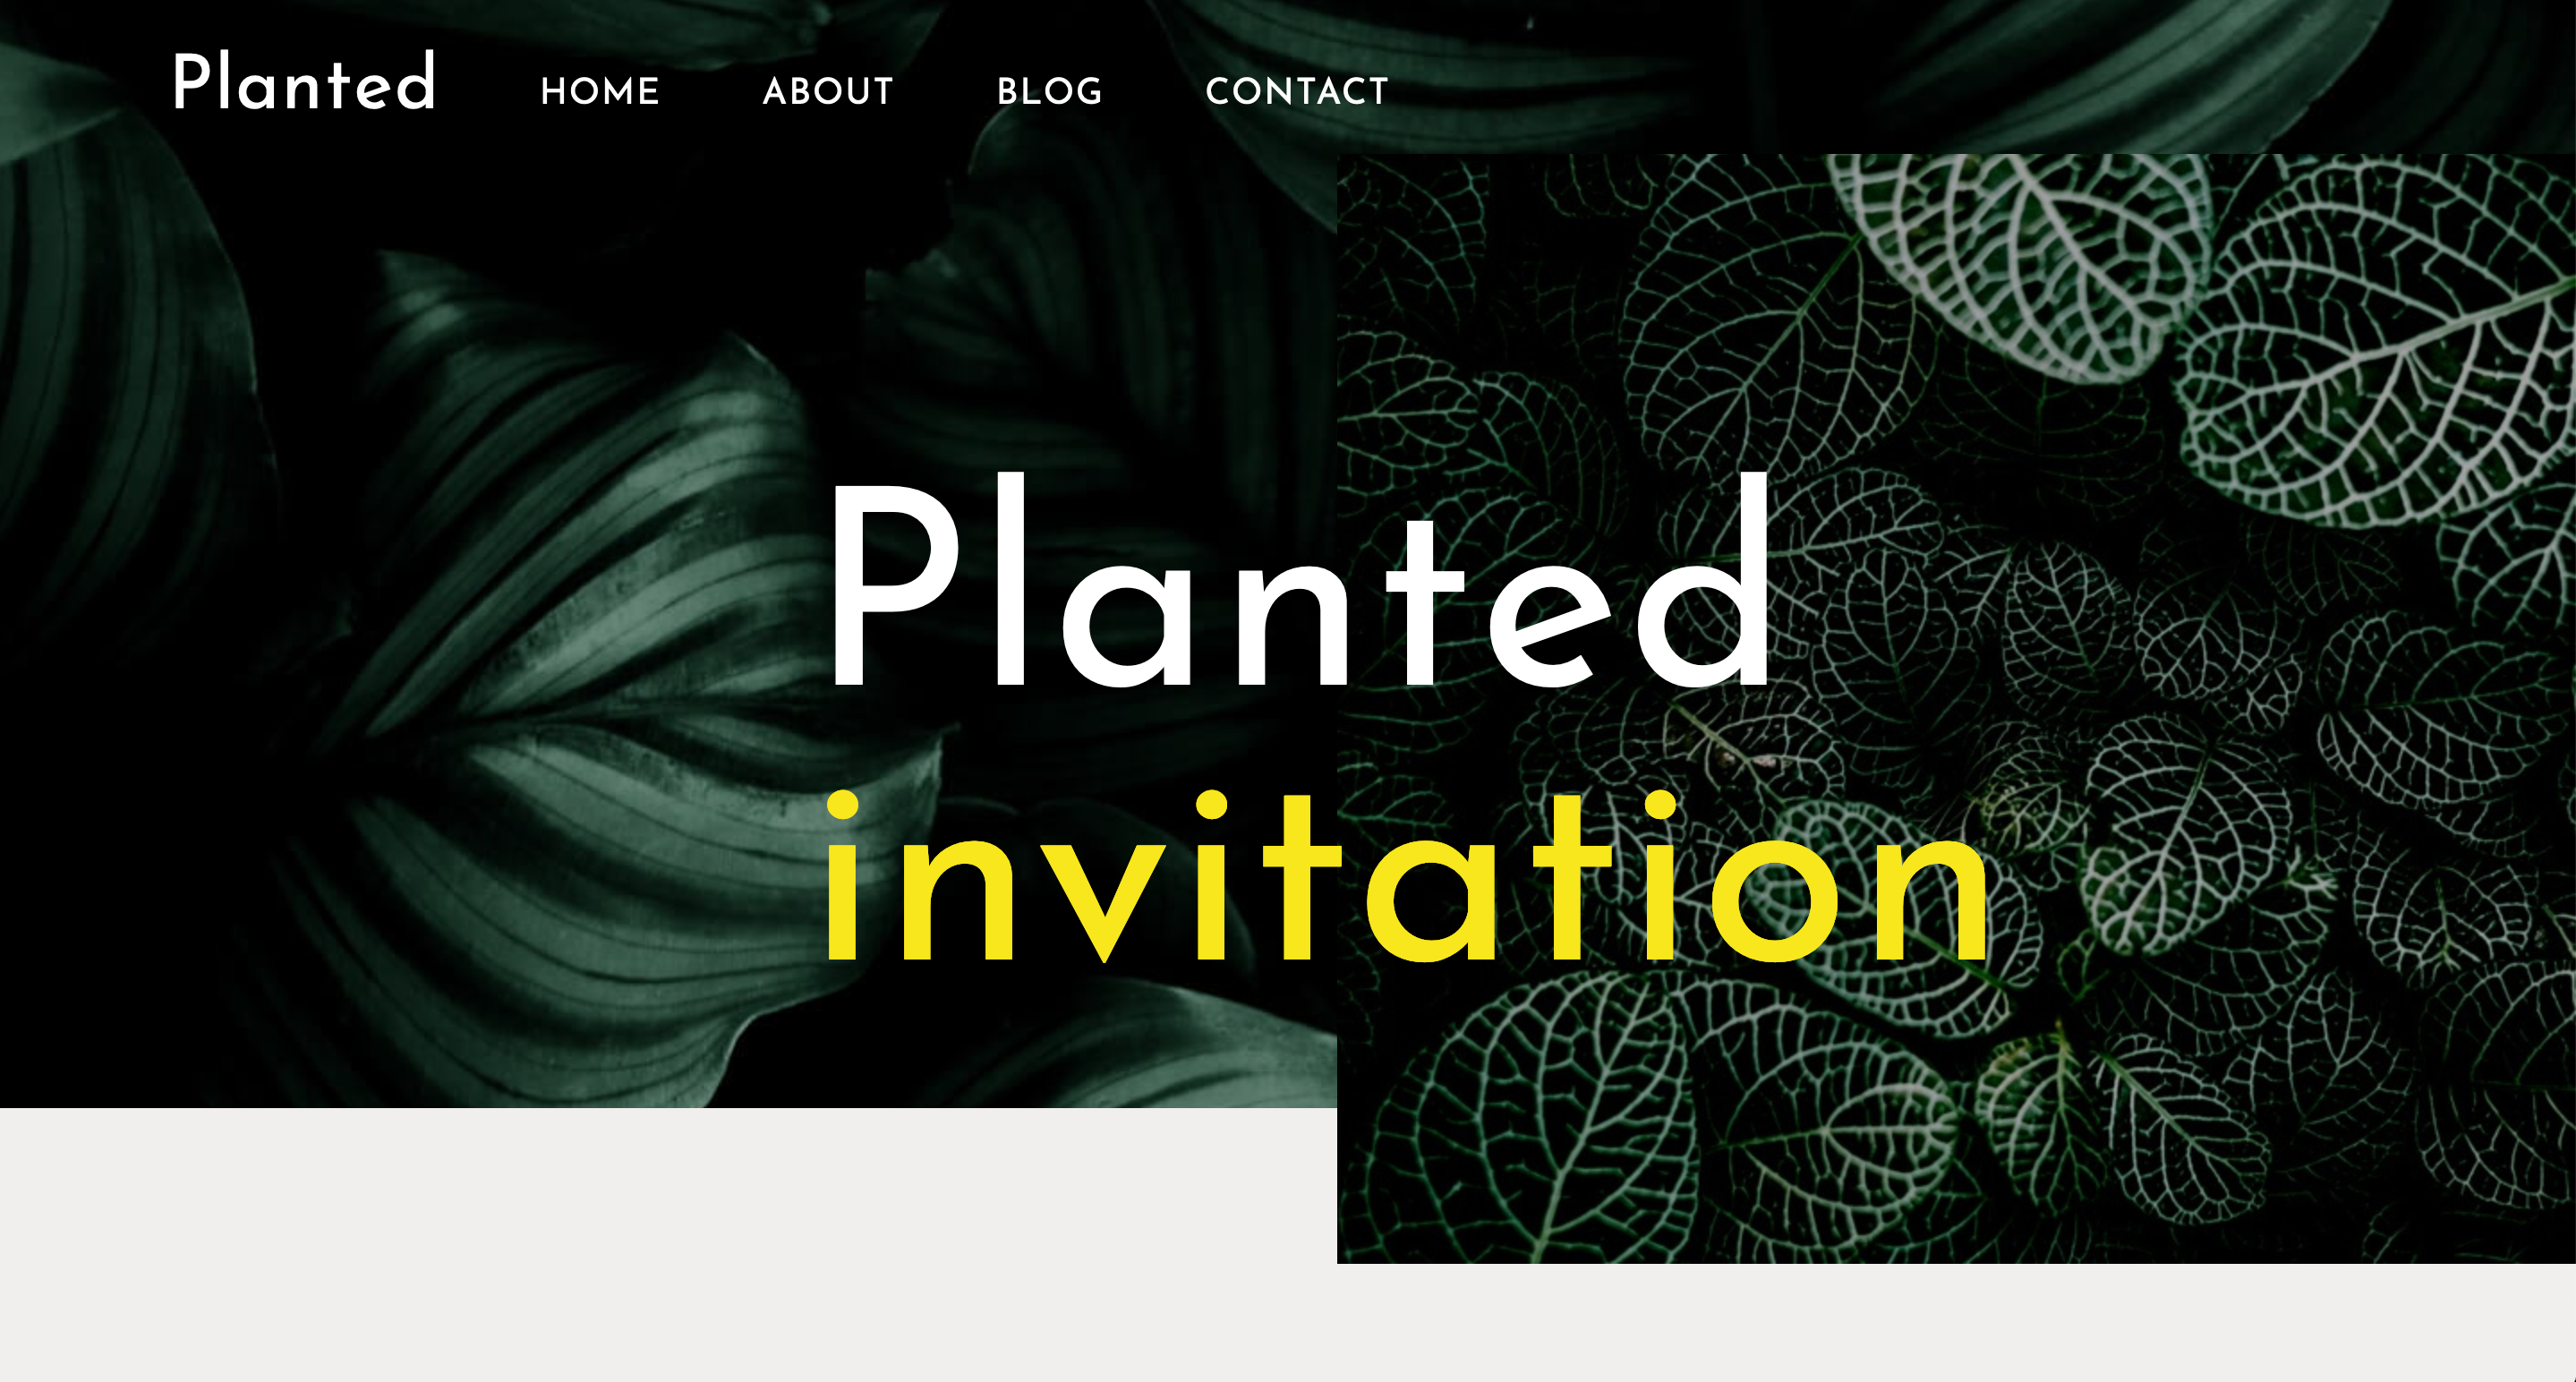 homepage for Planted website